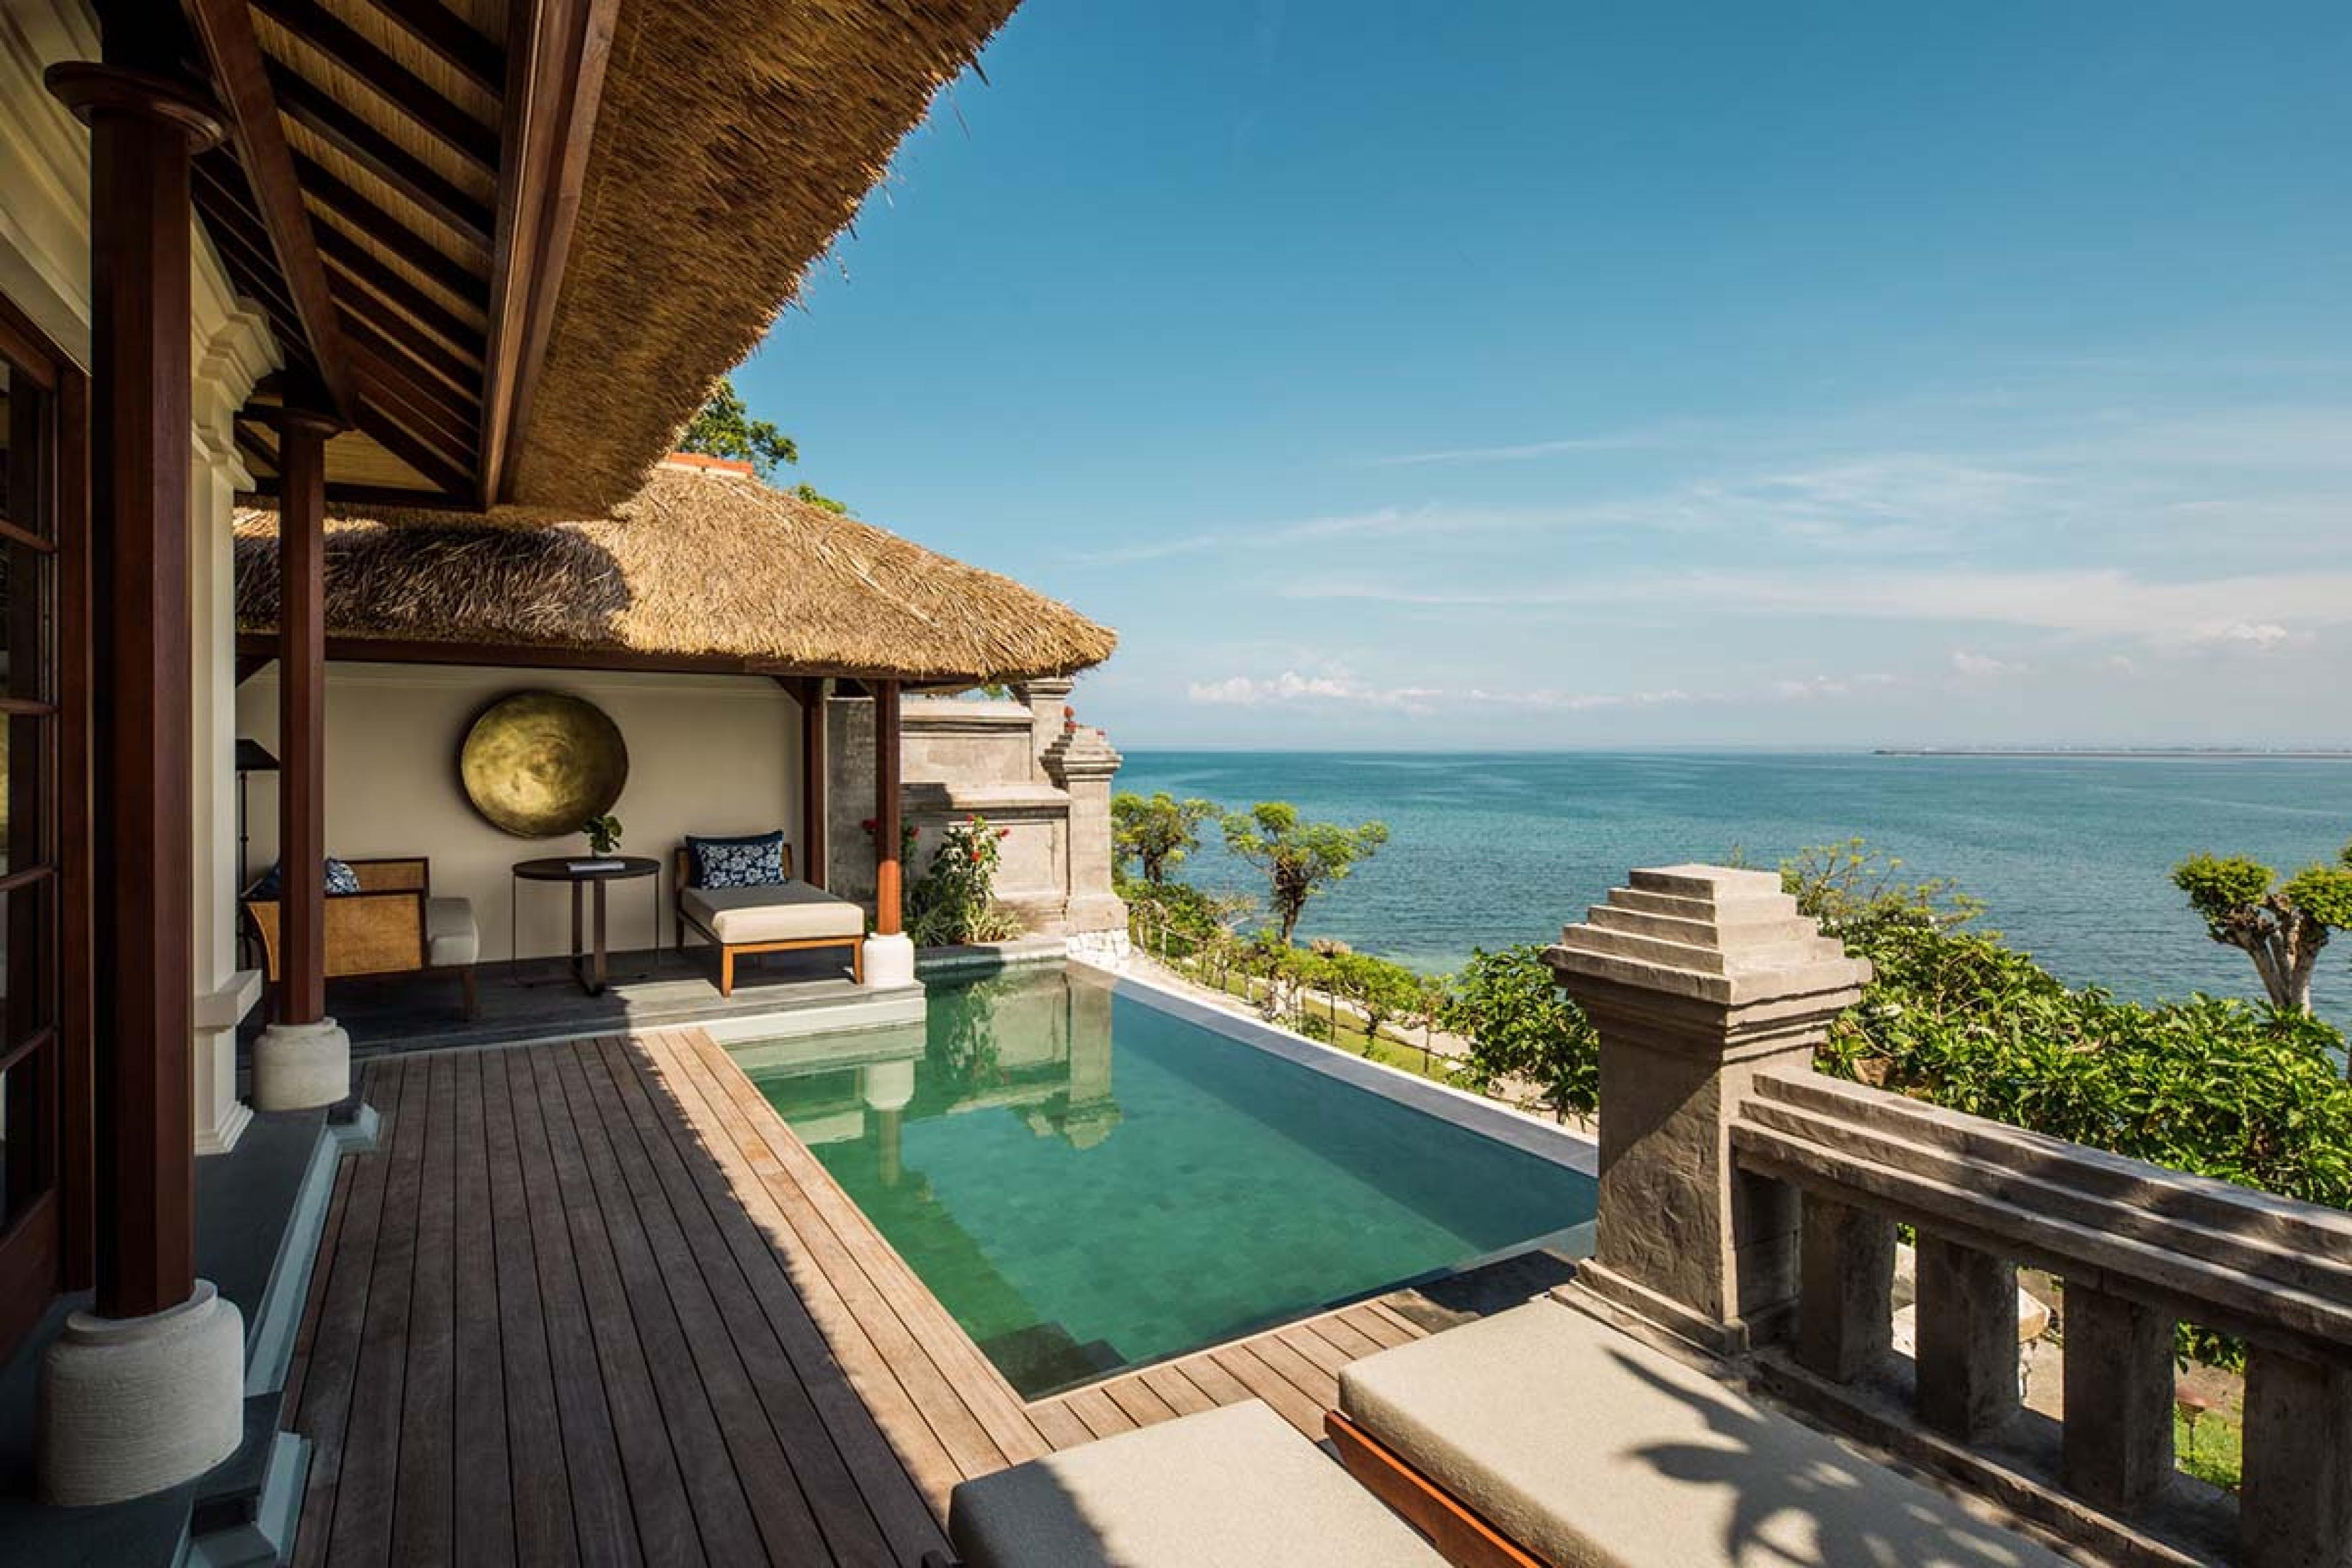 patio with a plunge pool looking out on the ocean